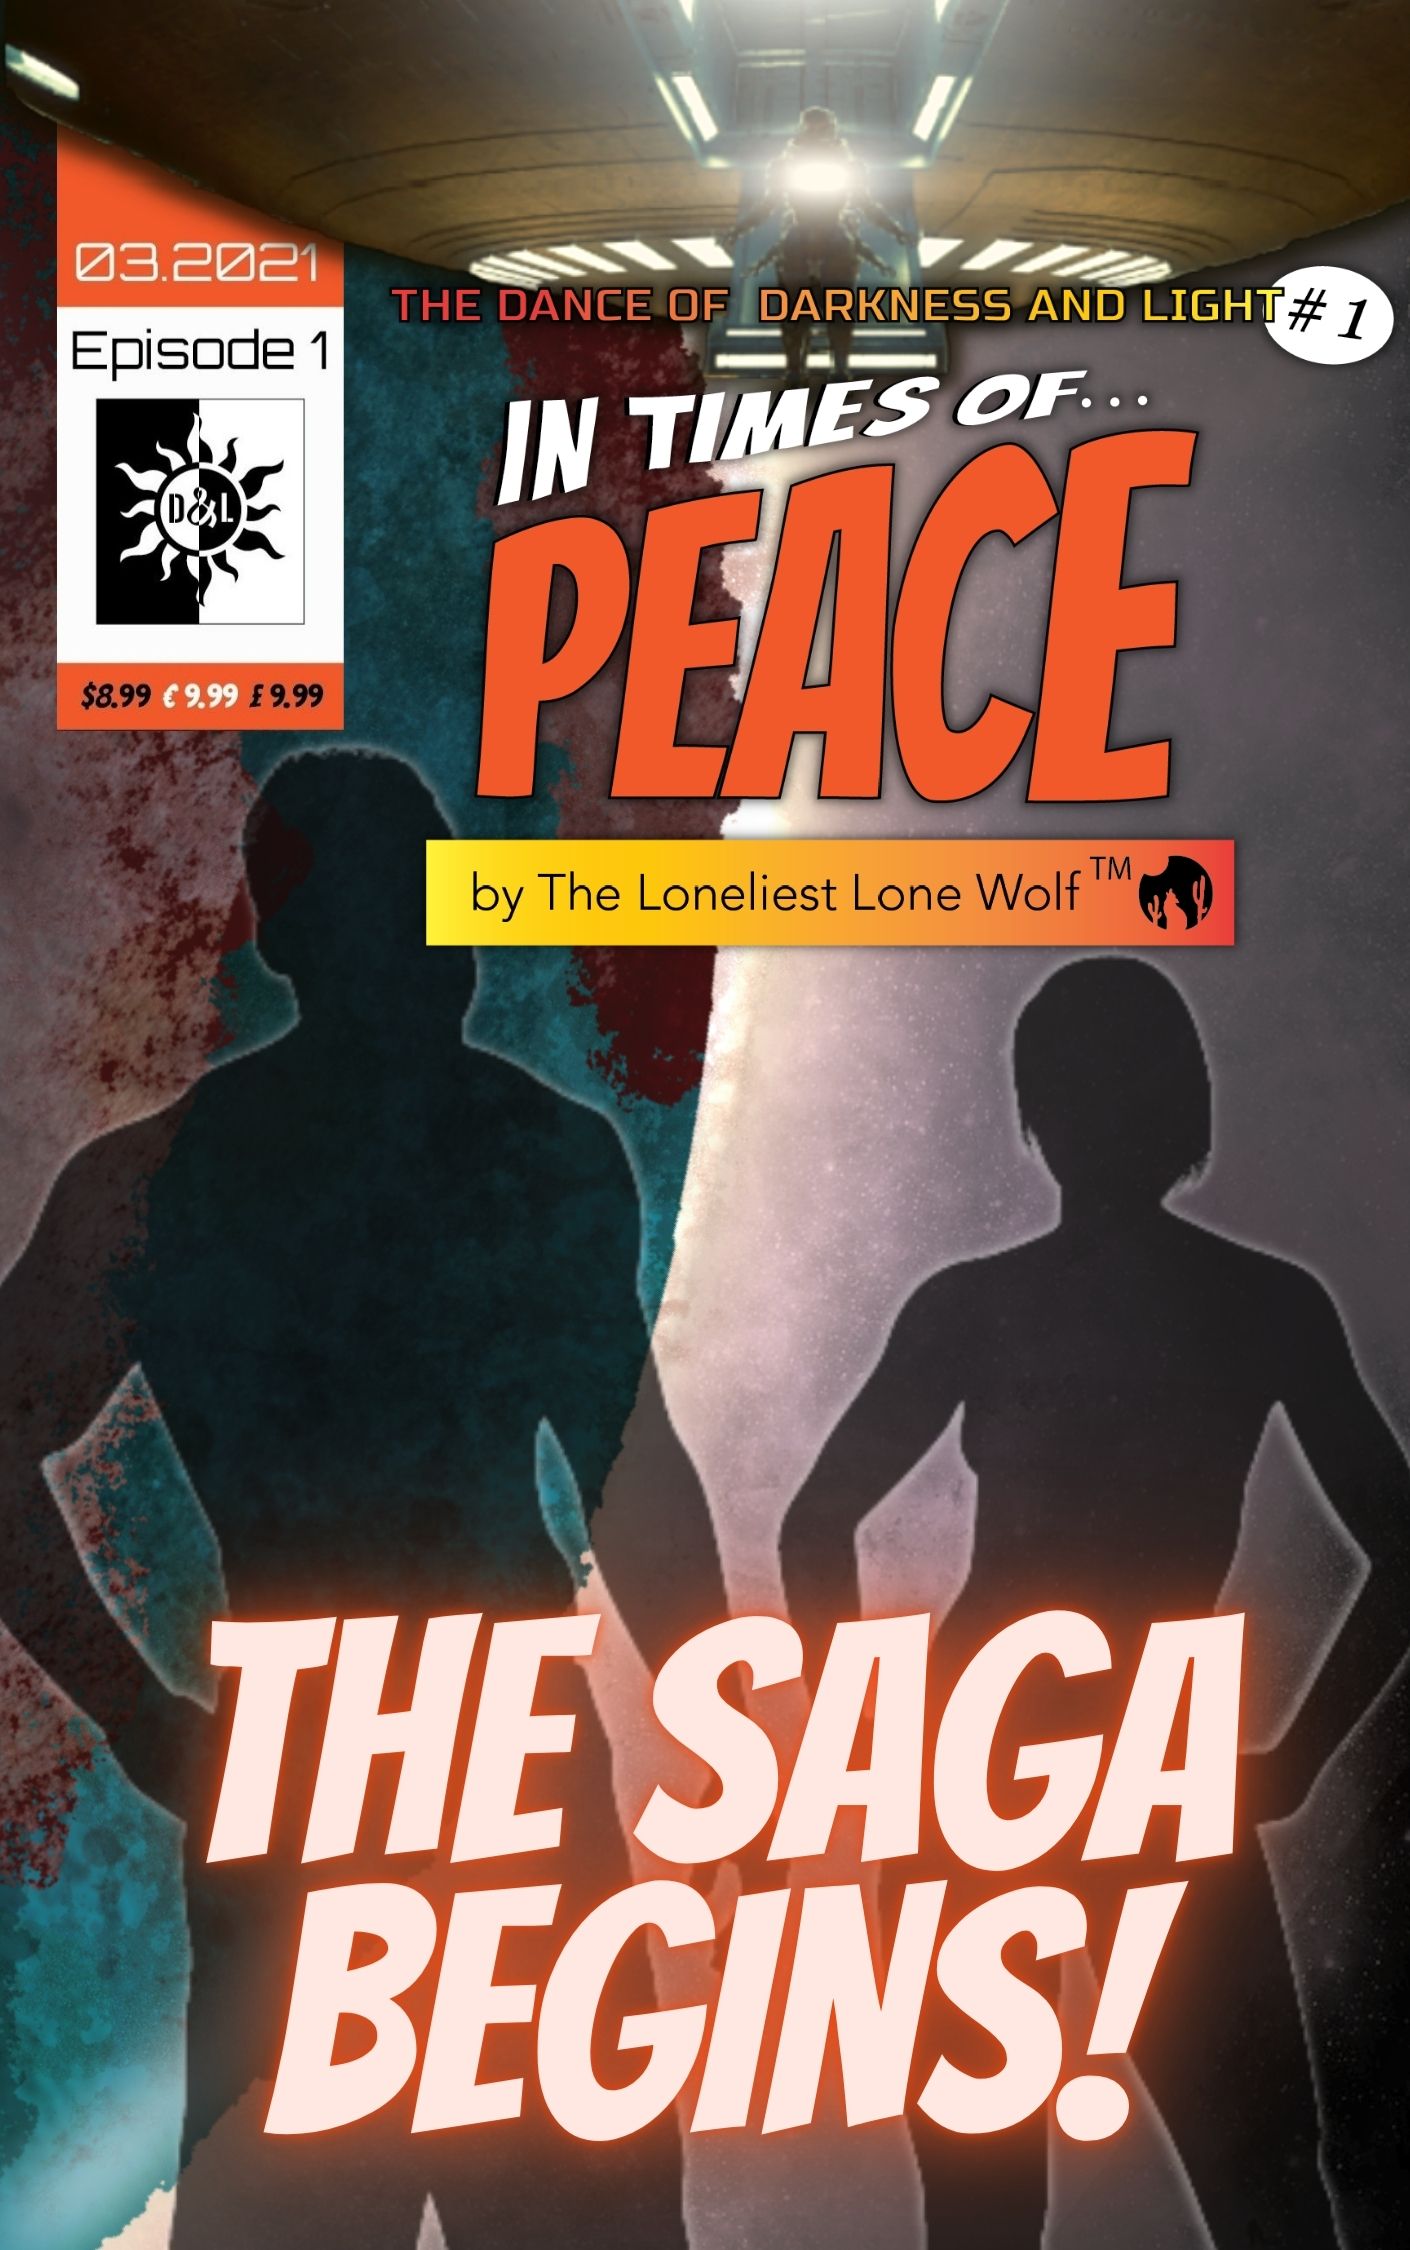 FREE: In Times of Peace: Dance of Darkness and Light Episode 1 by The Loneliest Lone Wolf